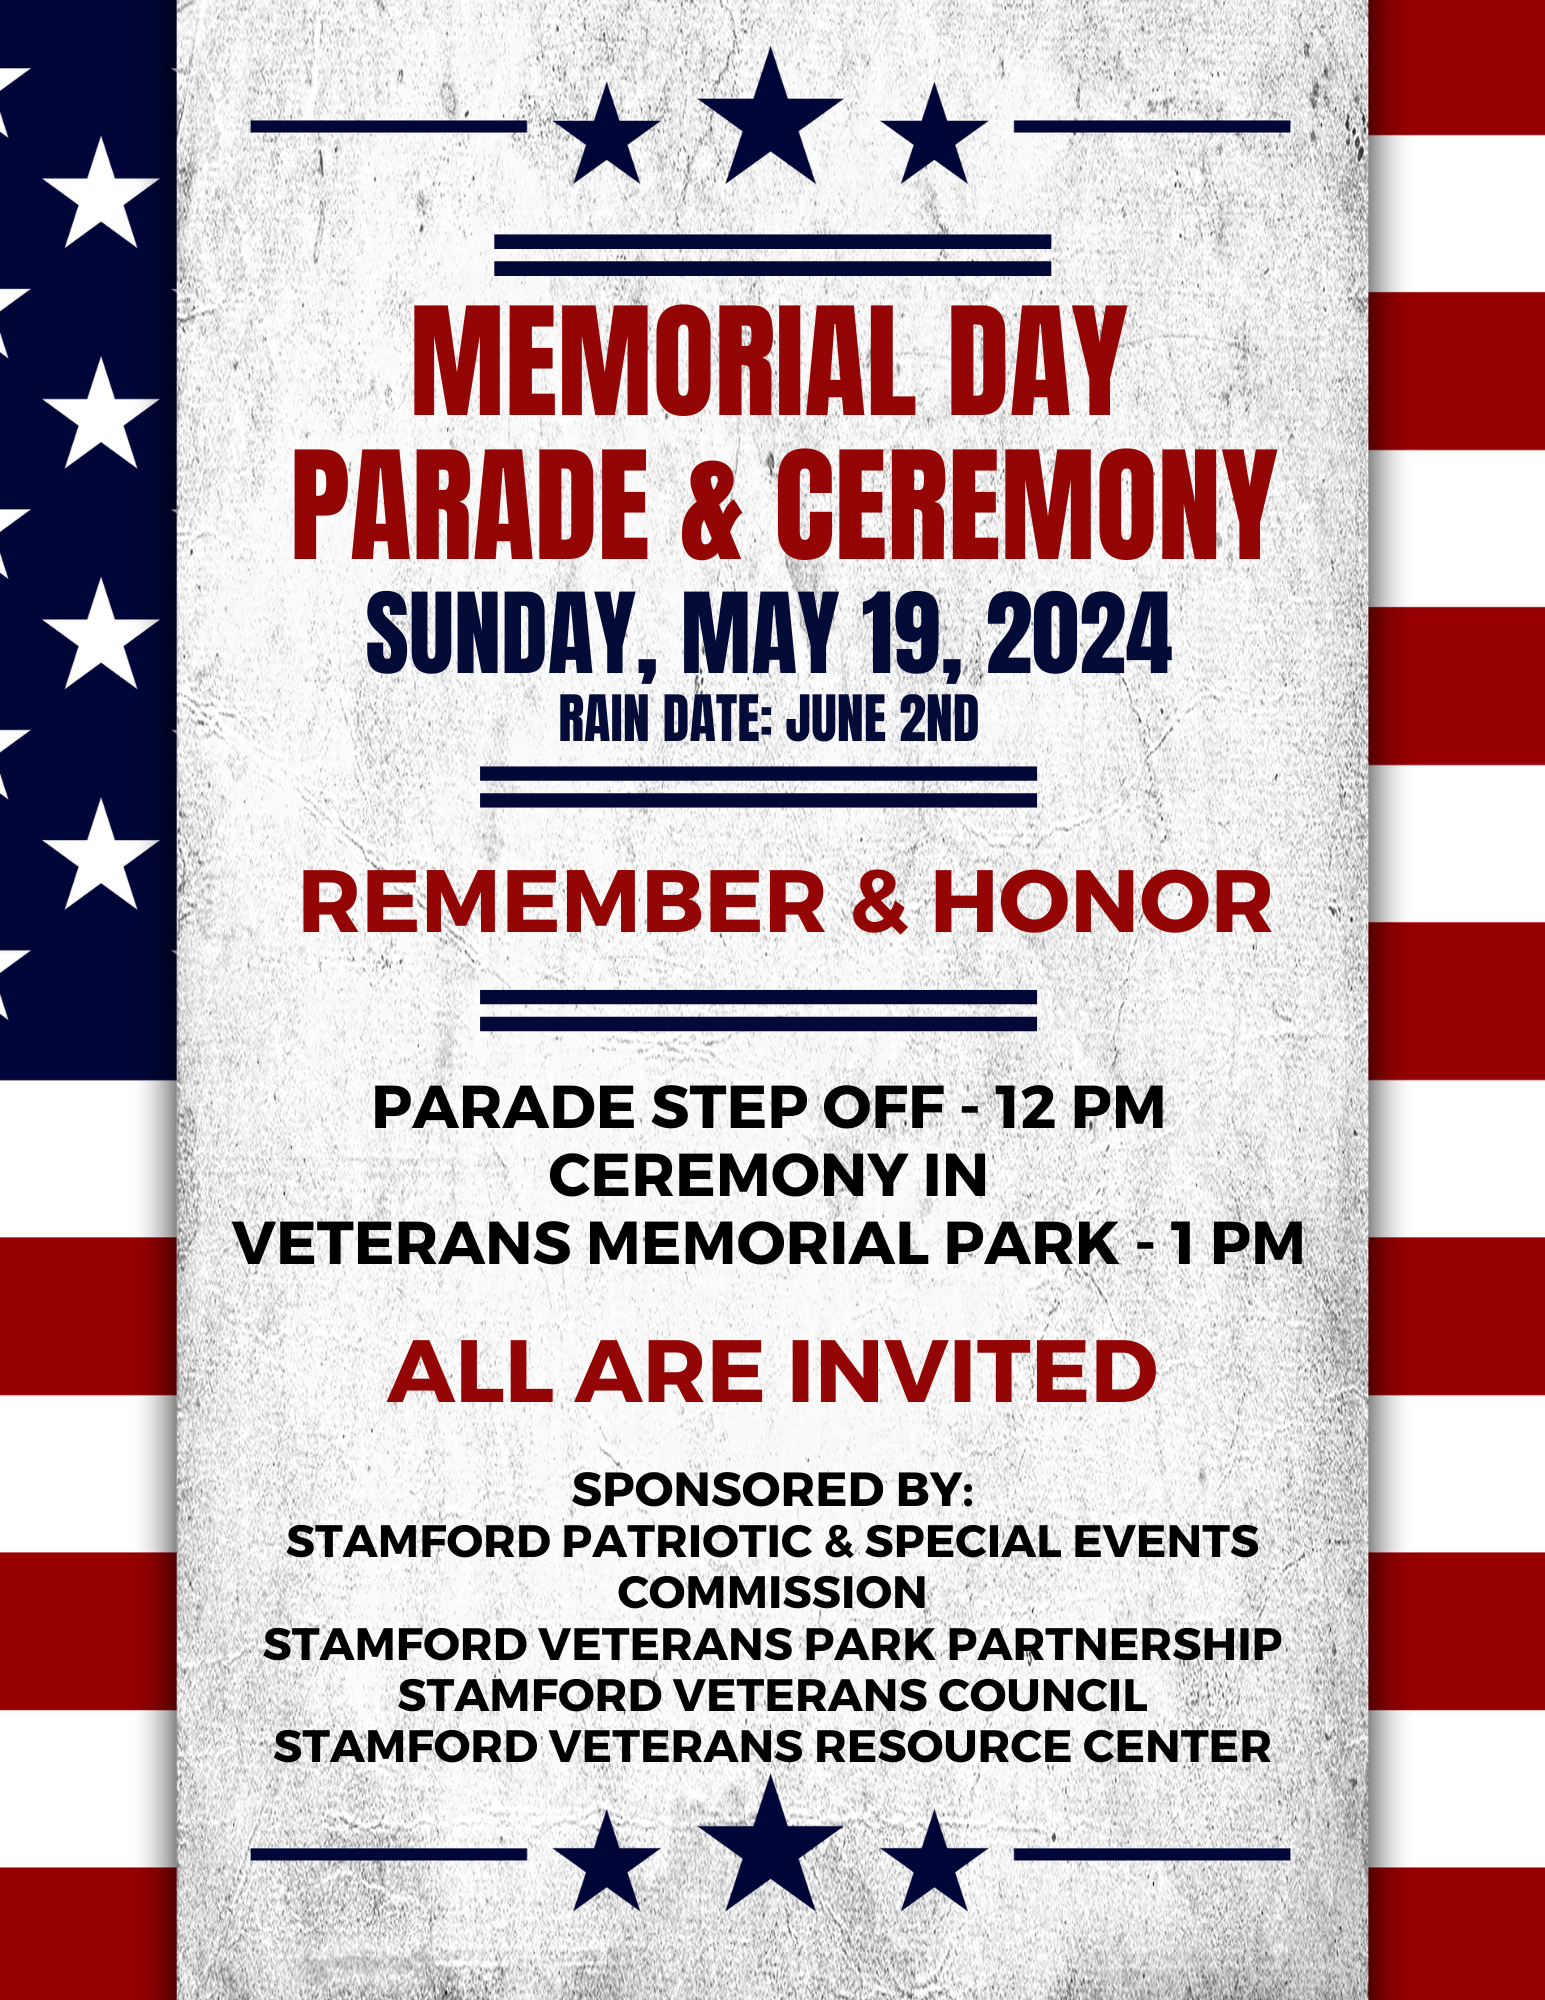 Red, White, & Blue Memorial Day Parade 2024 Flyer. Parade and ceremony will be Sunday May 19th 2024. Rain Date is June 2nd. Parade starts at 12pm ALL are invited. Ceremony in Veterans Memorial Park at 1pm.